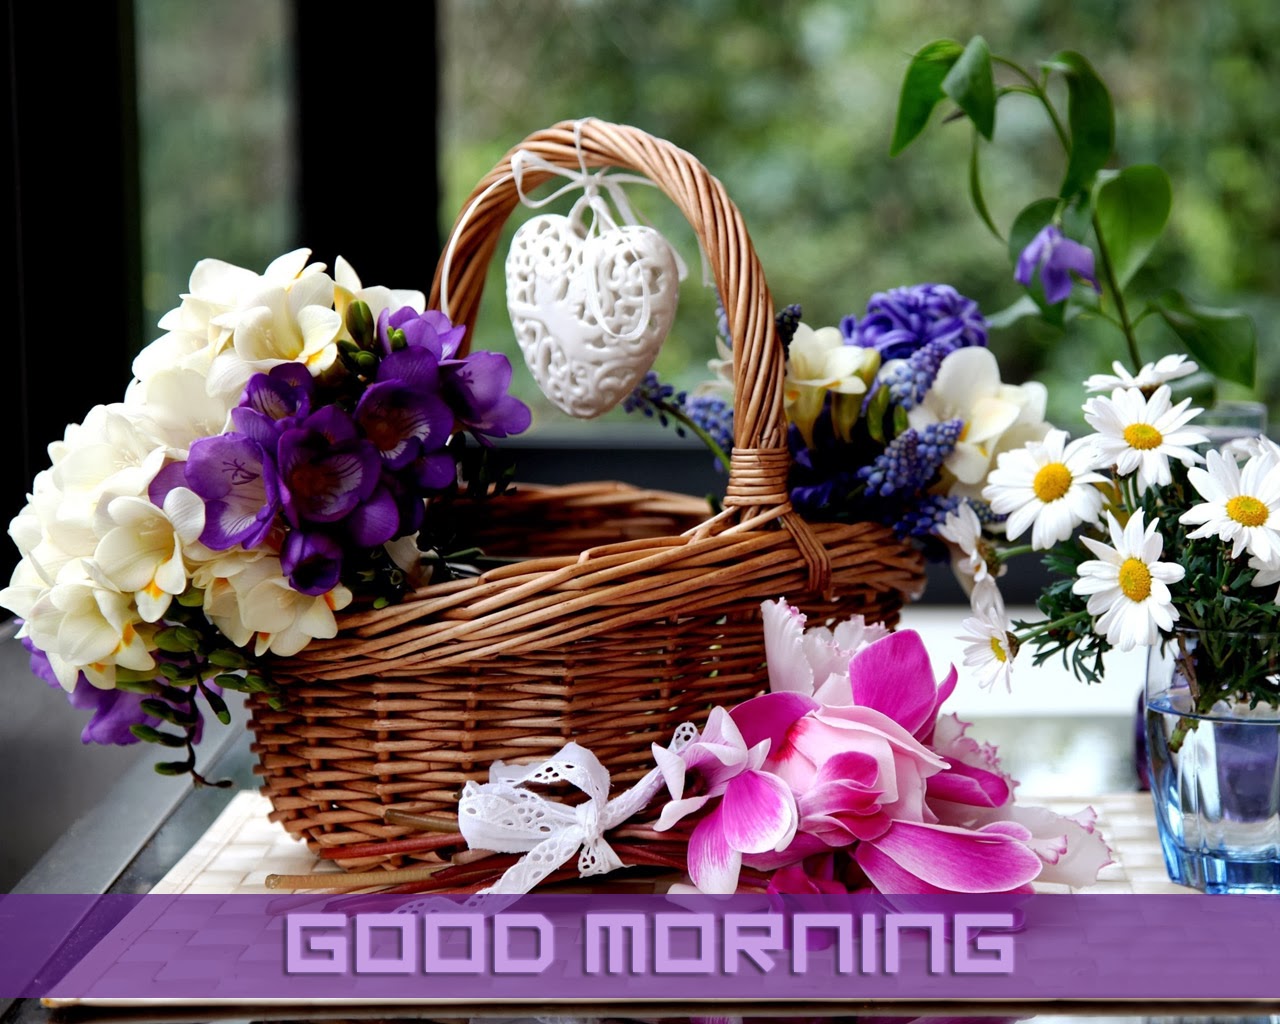 good morning with flowers wallpapers,basket,flower,flower girl basket,picnic basket,gift basket